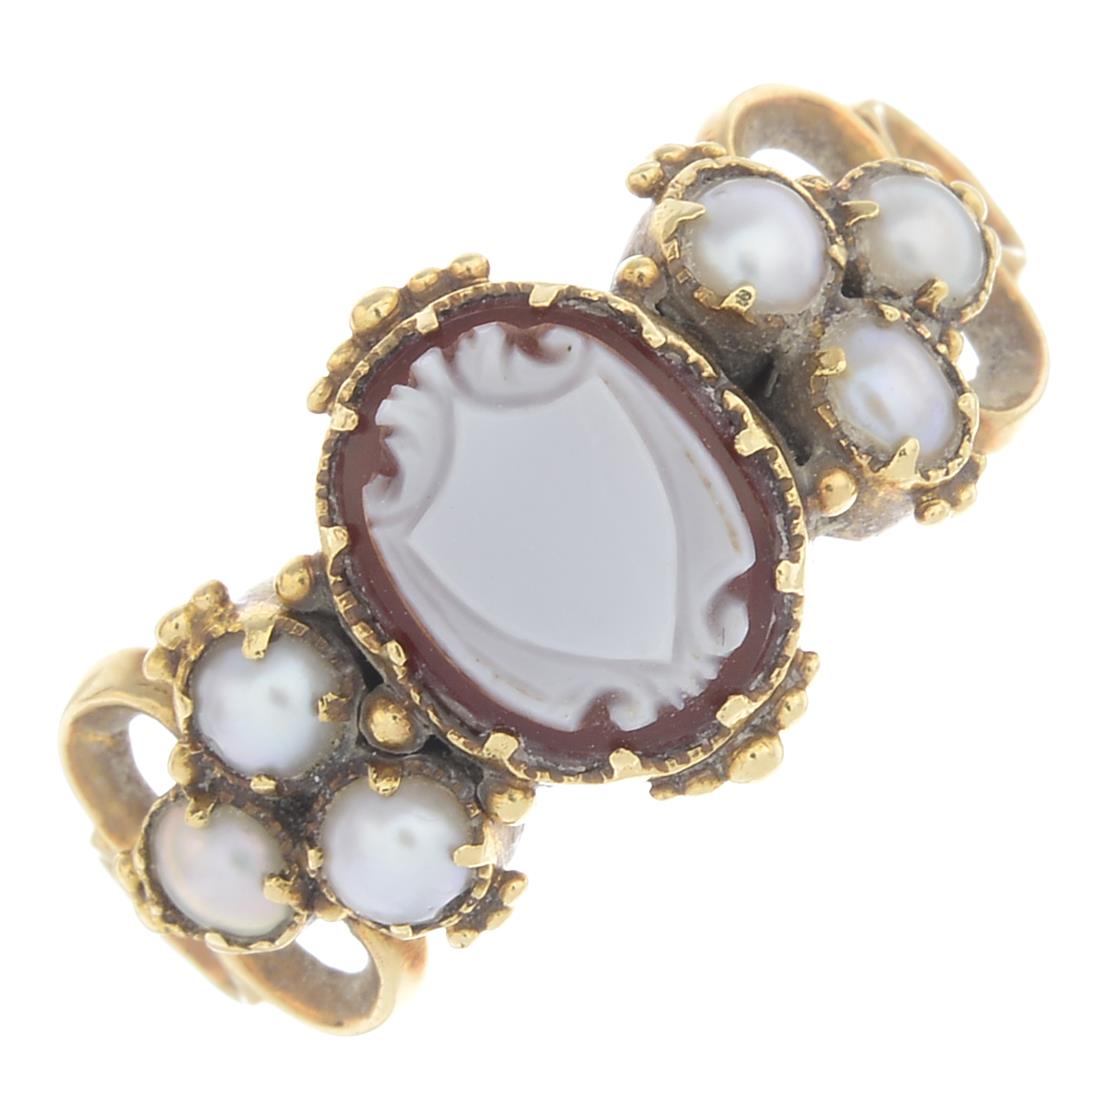 A mid Victorian gold sardonyx and split pearl ring.